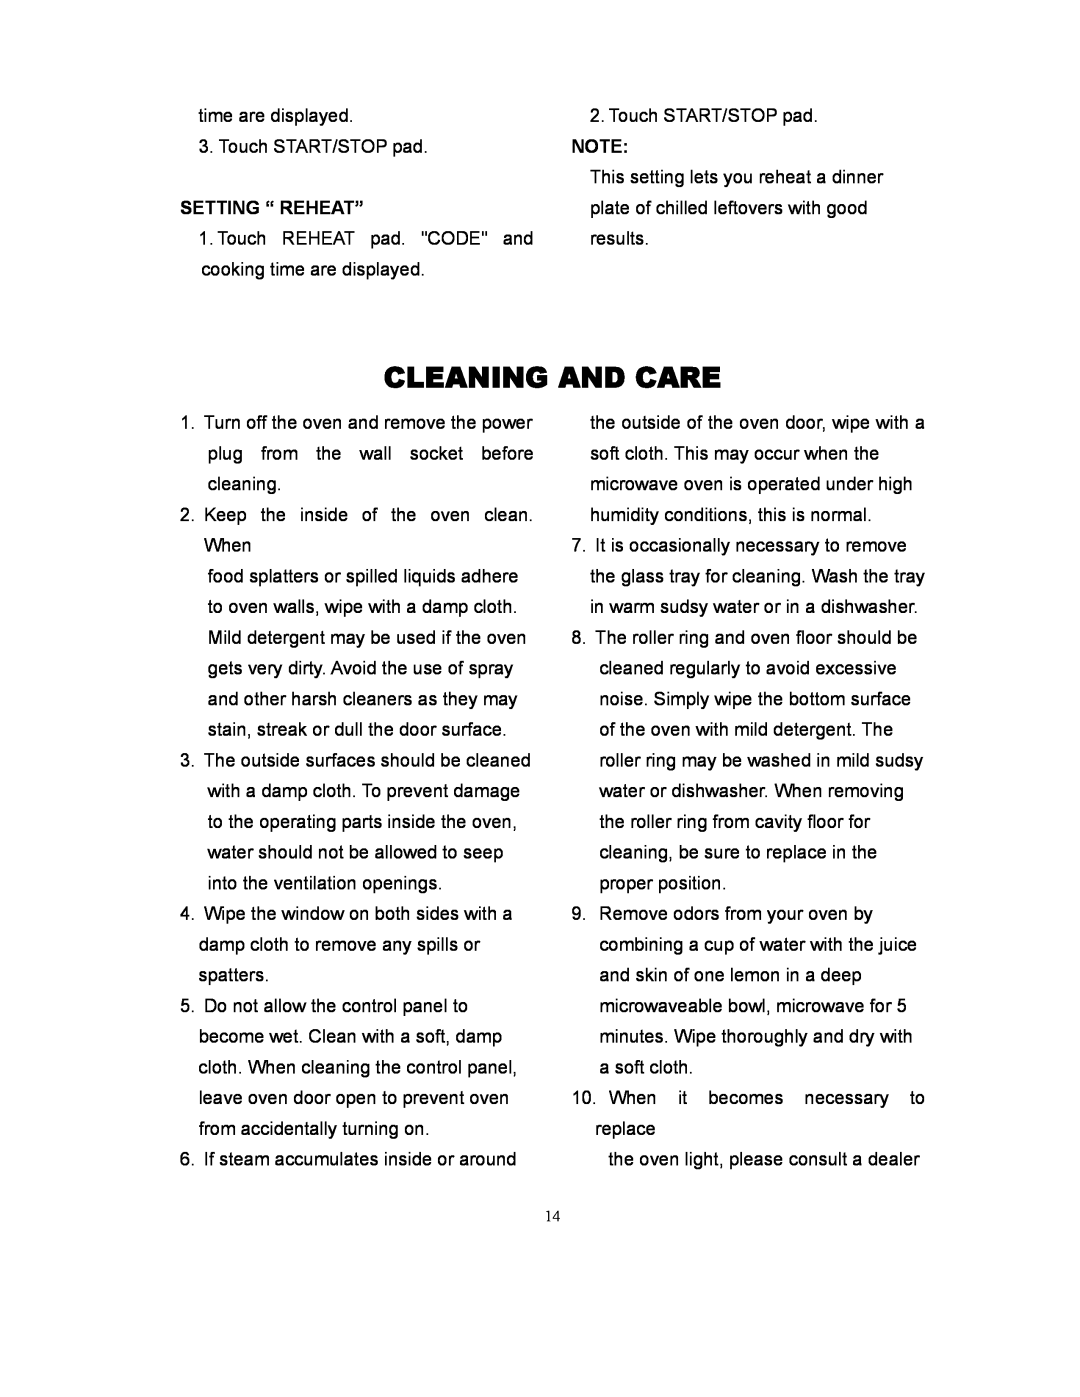 Sunbeam SMW978 owner manual Cleaning And Care, Setting “ Reheat” 